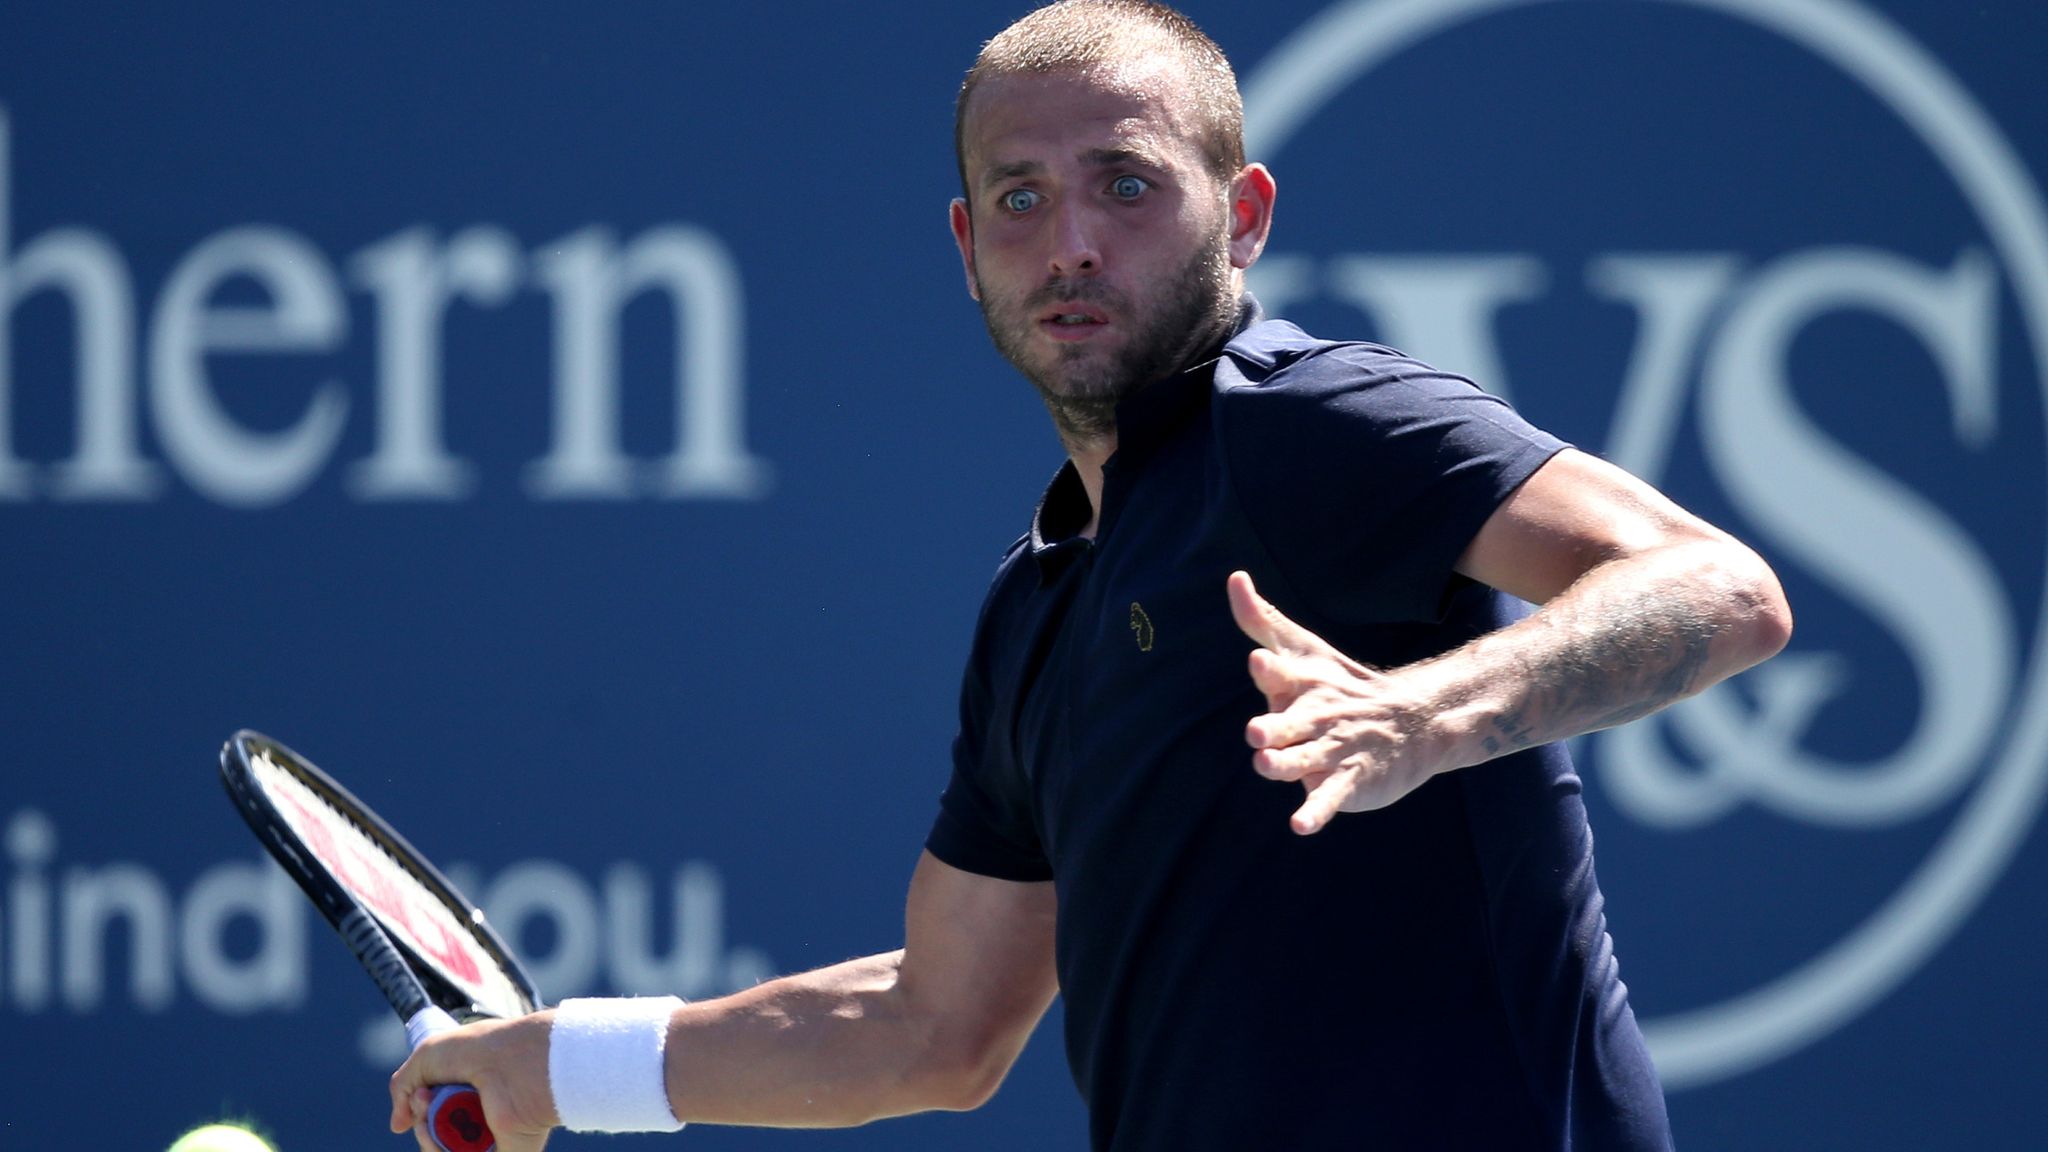 Dan Evans to face Milos Raonic at the Western and Southern Open after Andrey Rublev win Tennis News Sky Sports